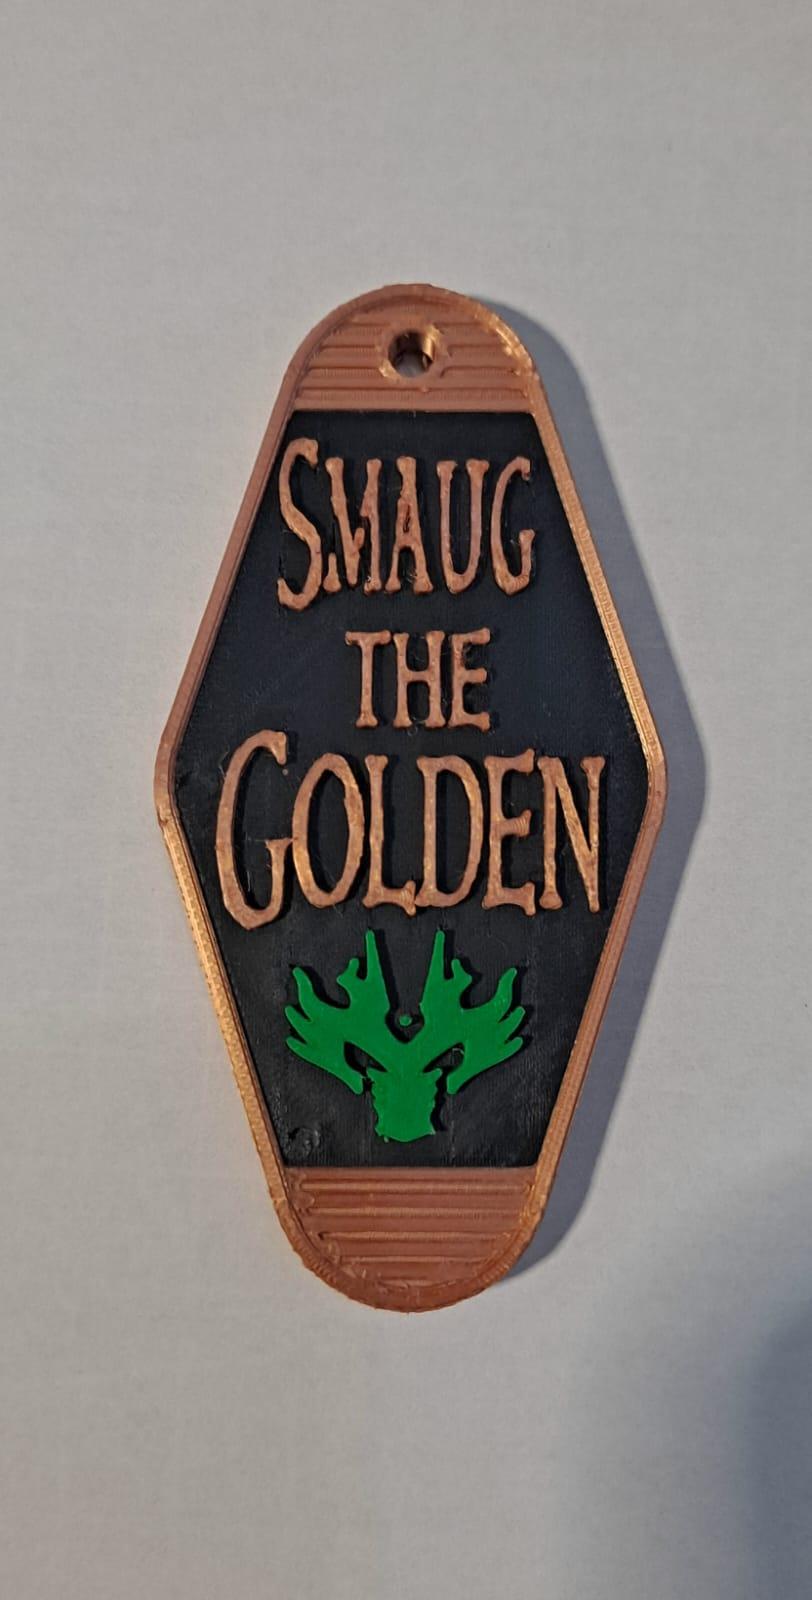 Smaug the golden keychain 3d model